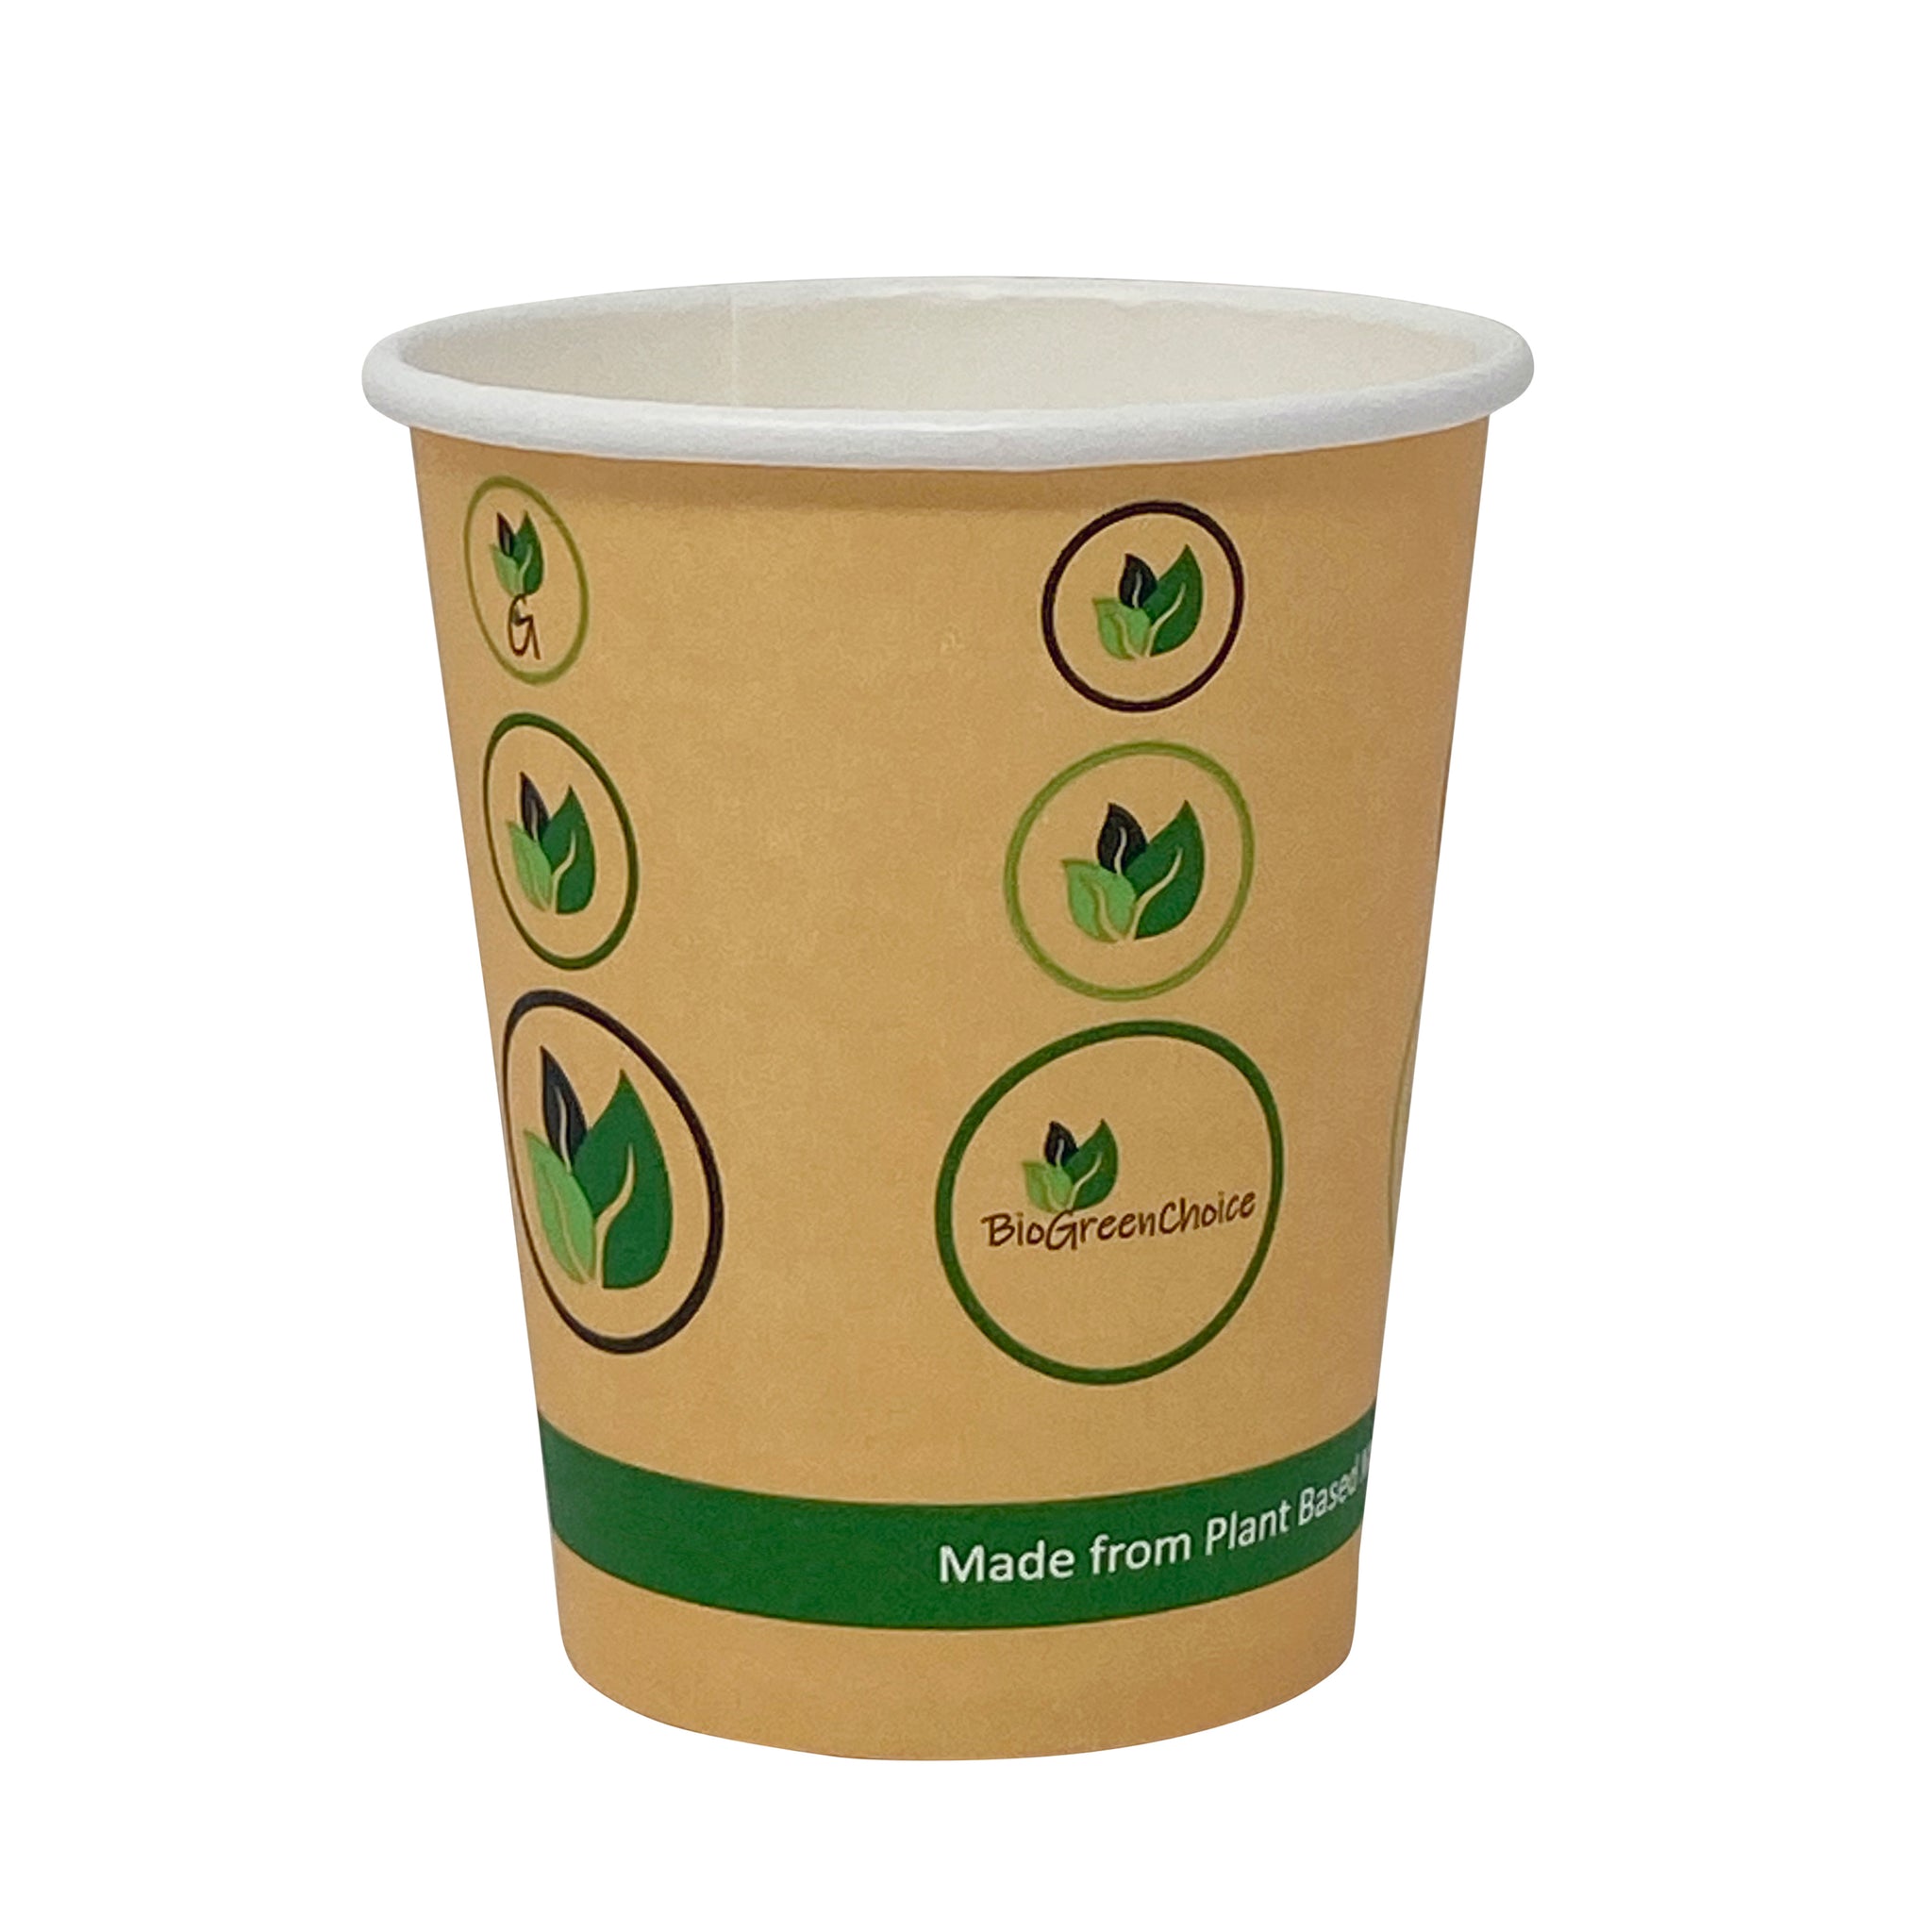 Custom Printed 16 oz Compostable Paper Coffee Cups